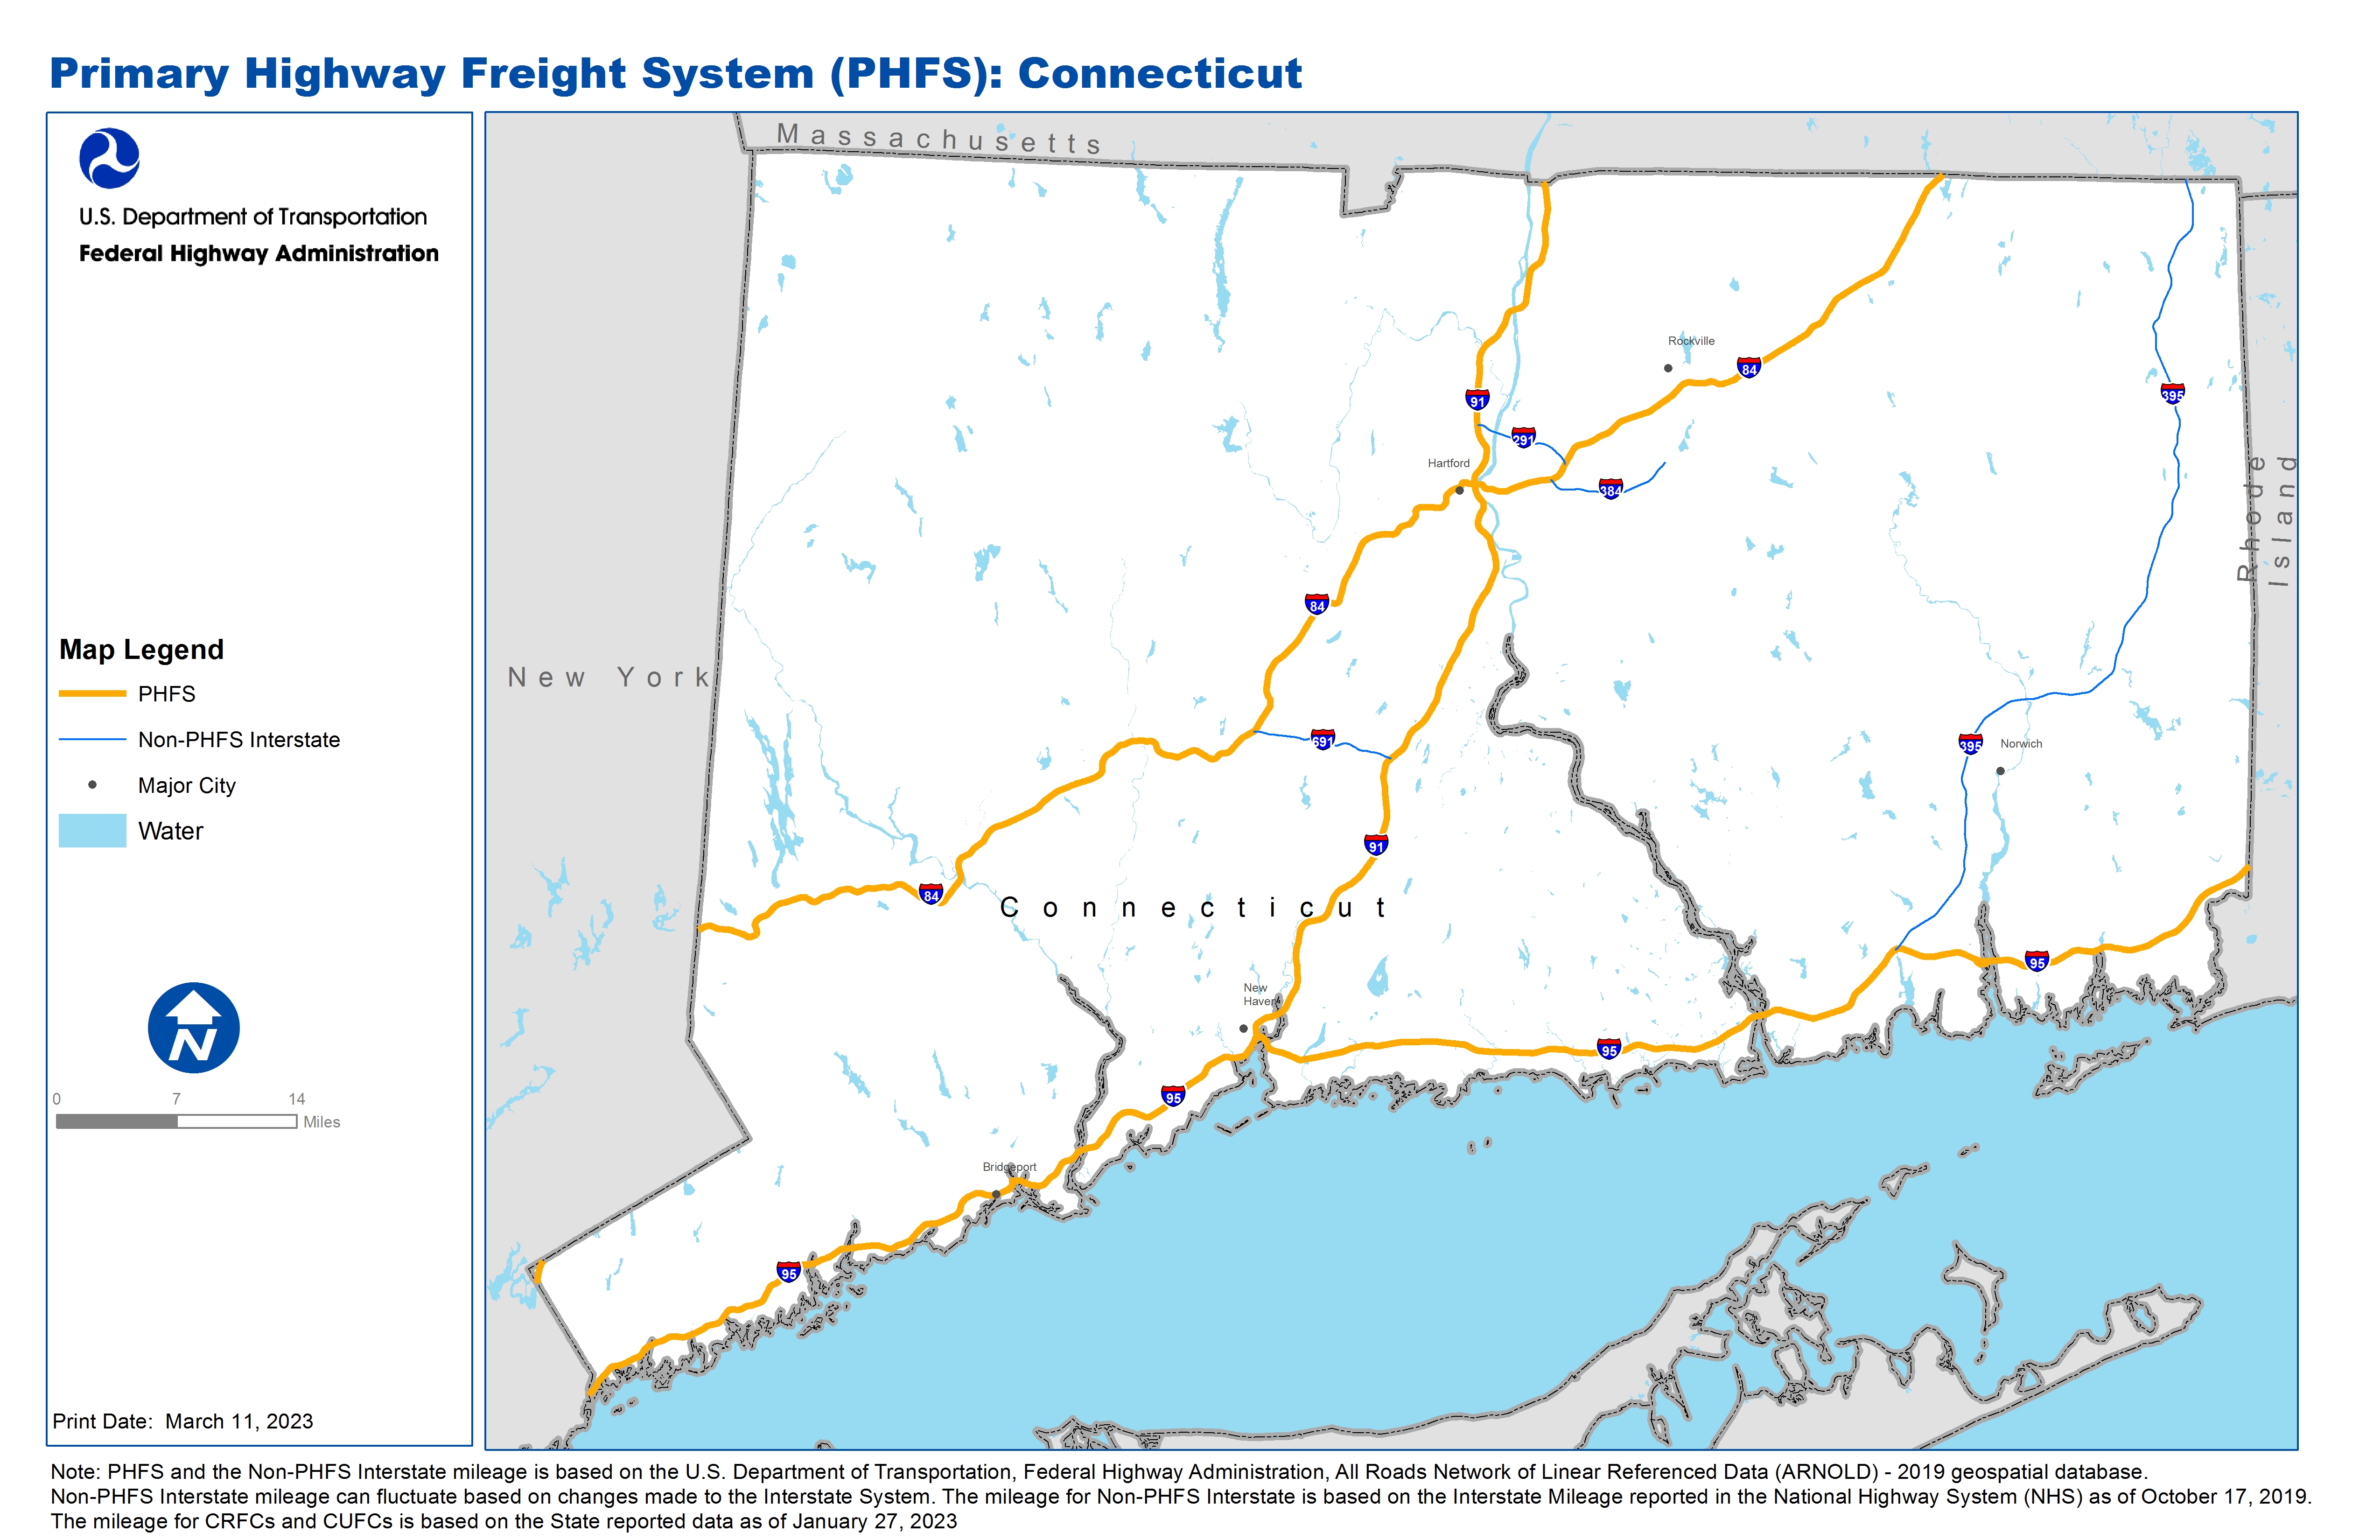 This map shows the Primary Highway Freight System (PHFS) routes as well as all the Interstate Highways within the state that are not part of the PHFS.